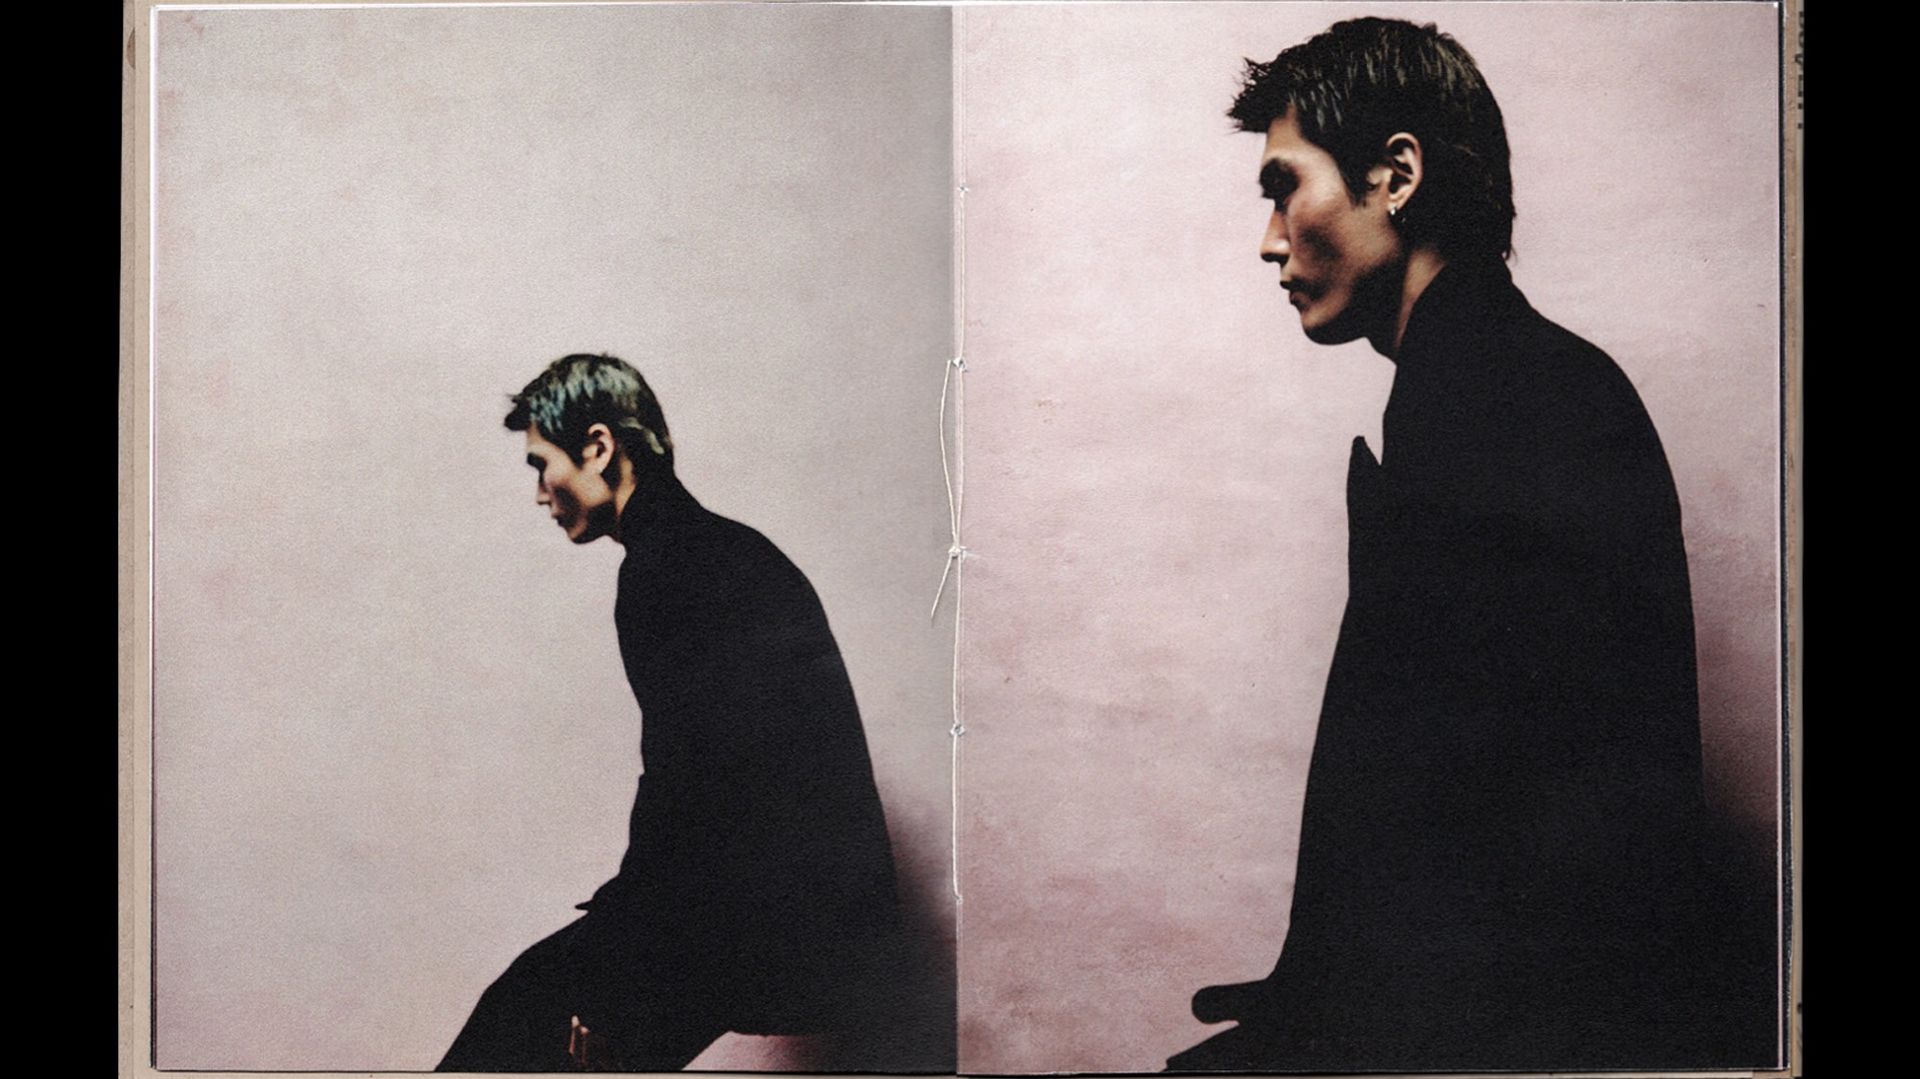 Two side by side images of a young man in all black, one sitting one standing, bound like a book in between the images